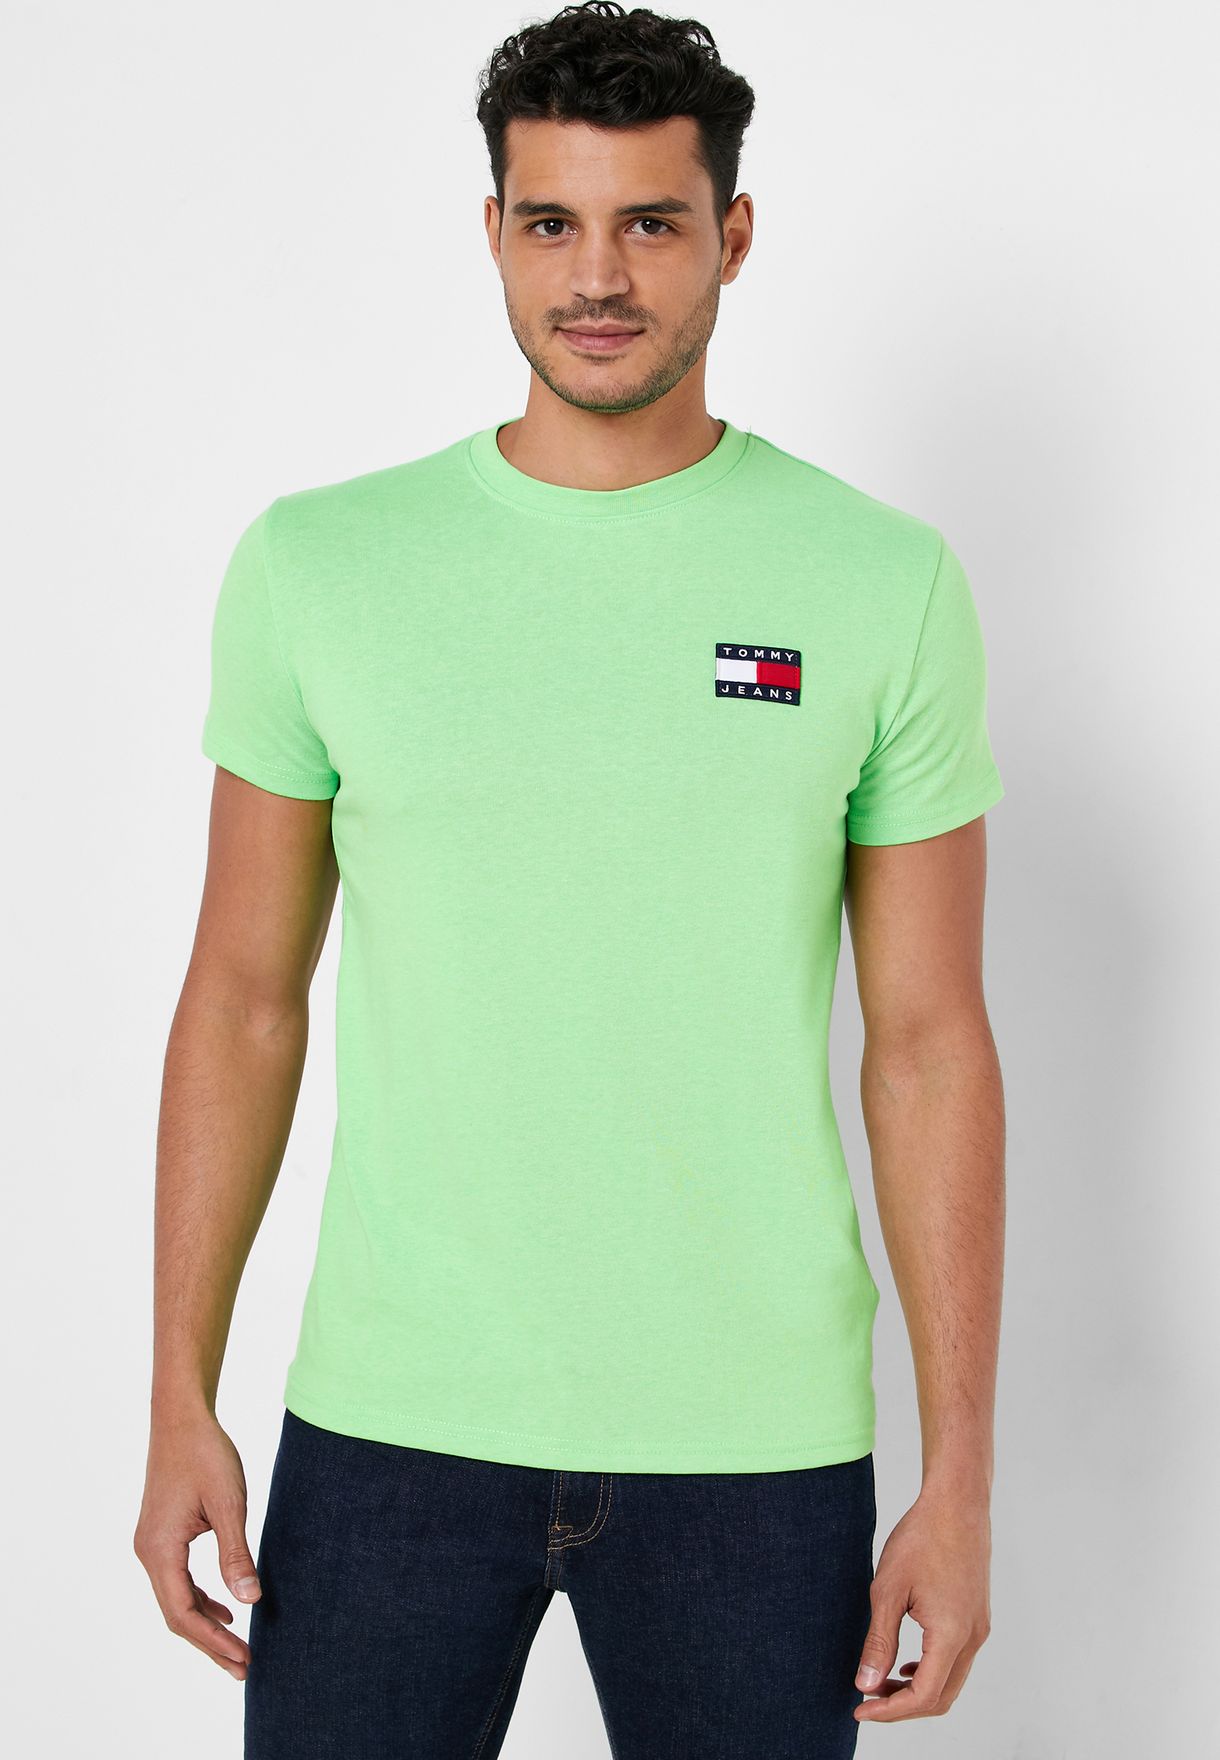 tommy jeans green t shirt